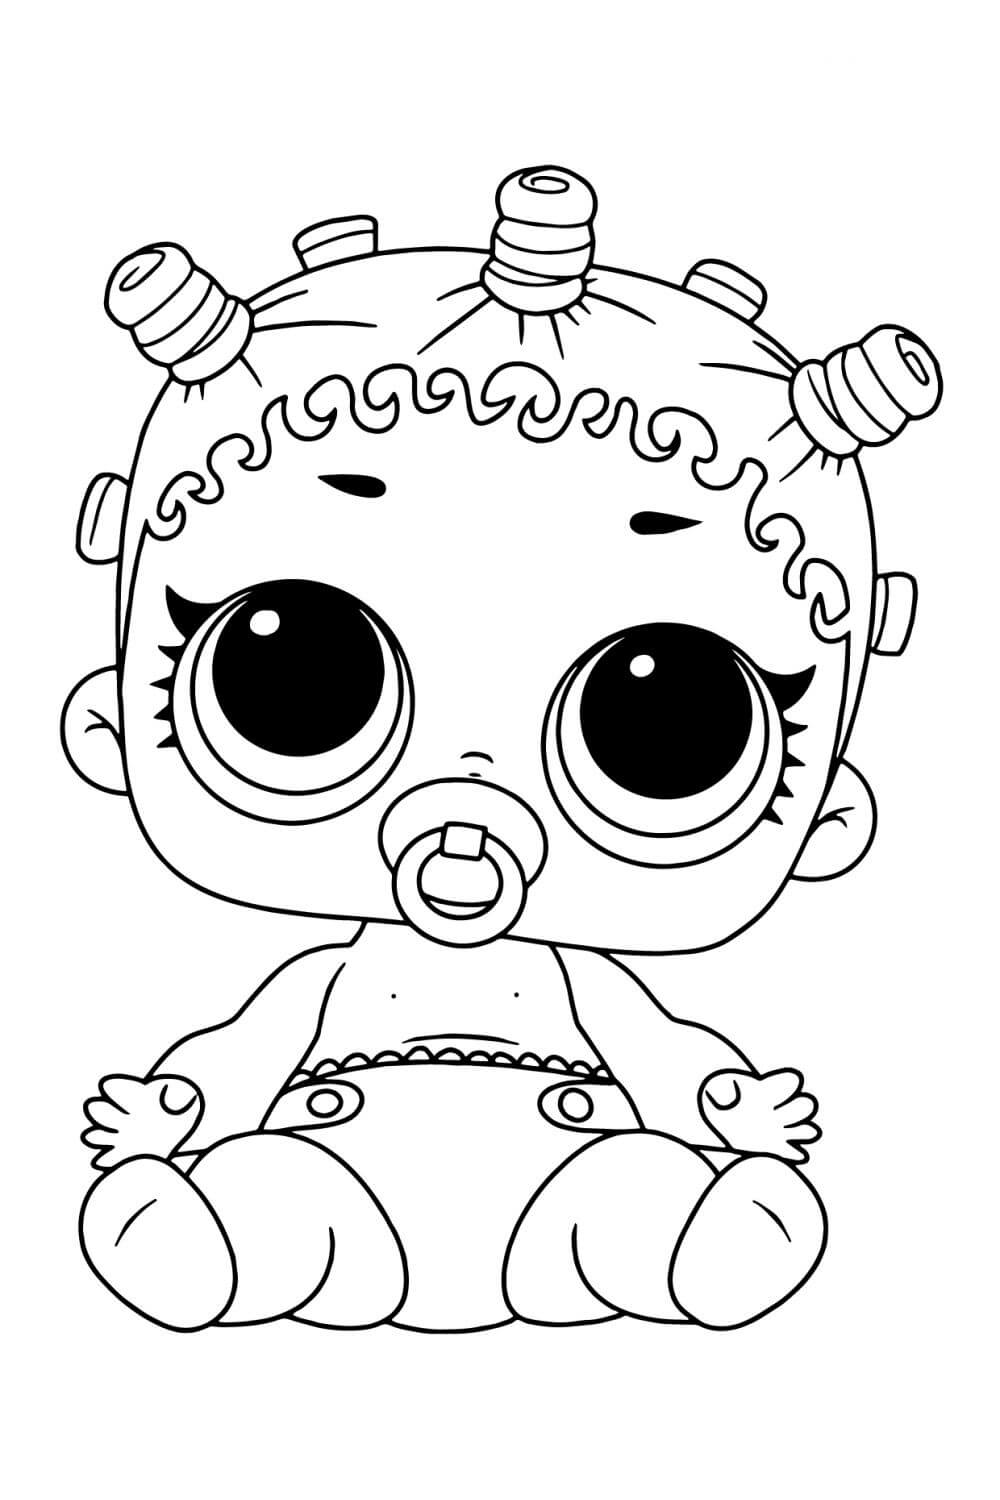 Skater LOL Baby Coloring Page - Free Printable Coloring Pages for Kids